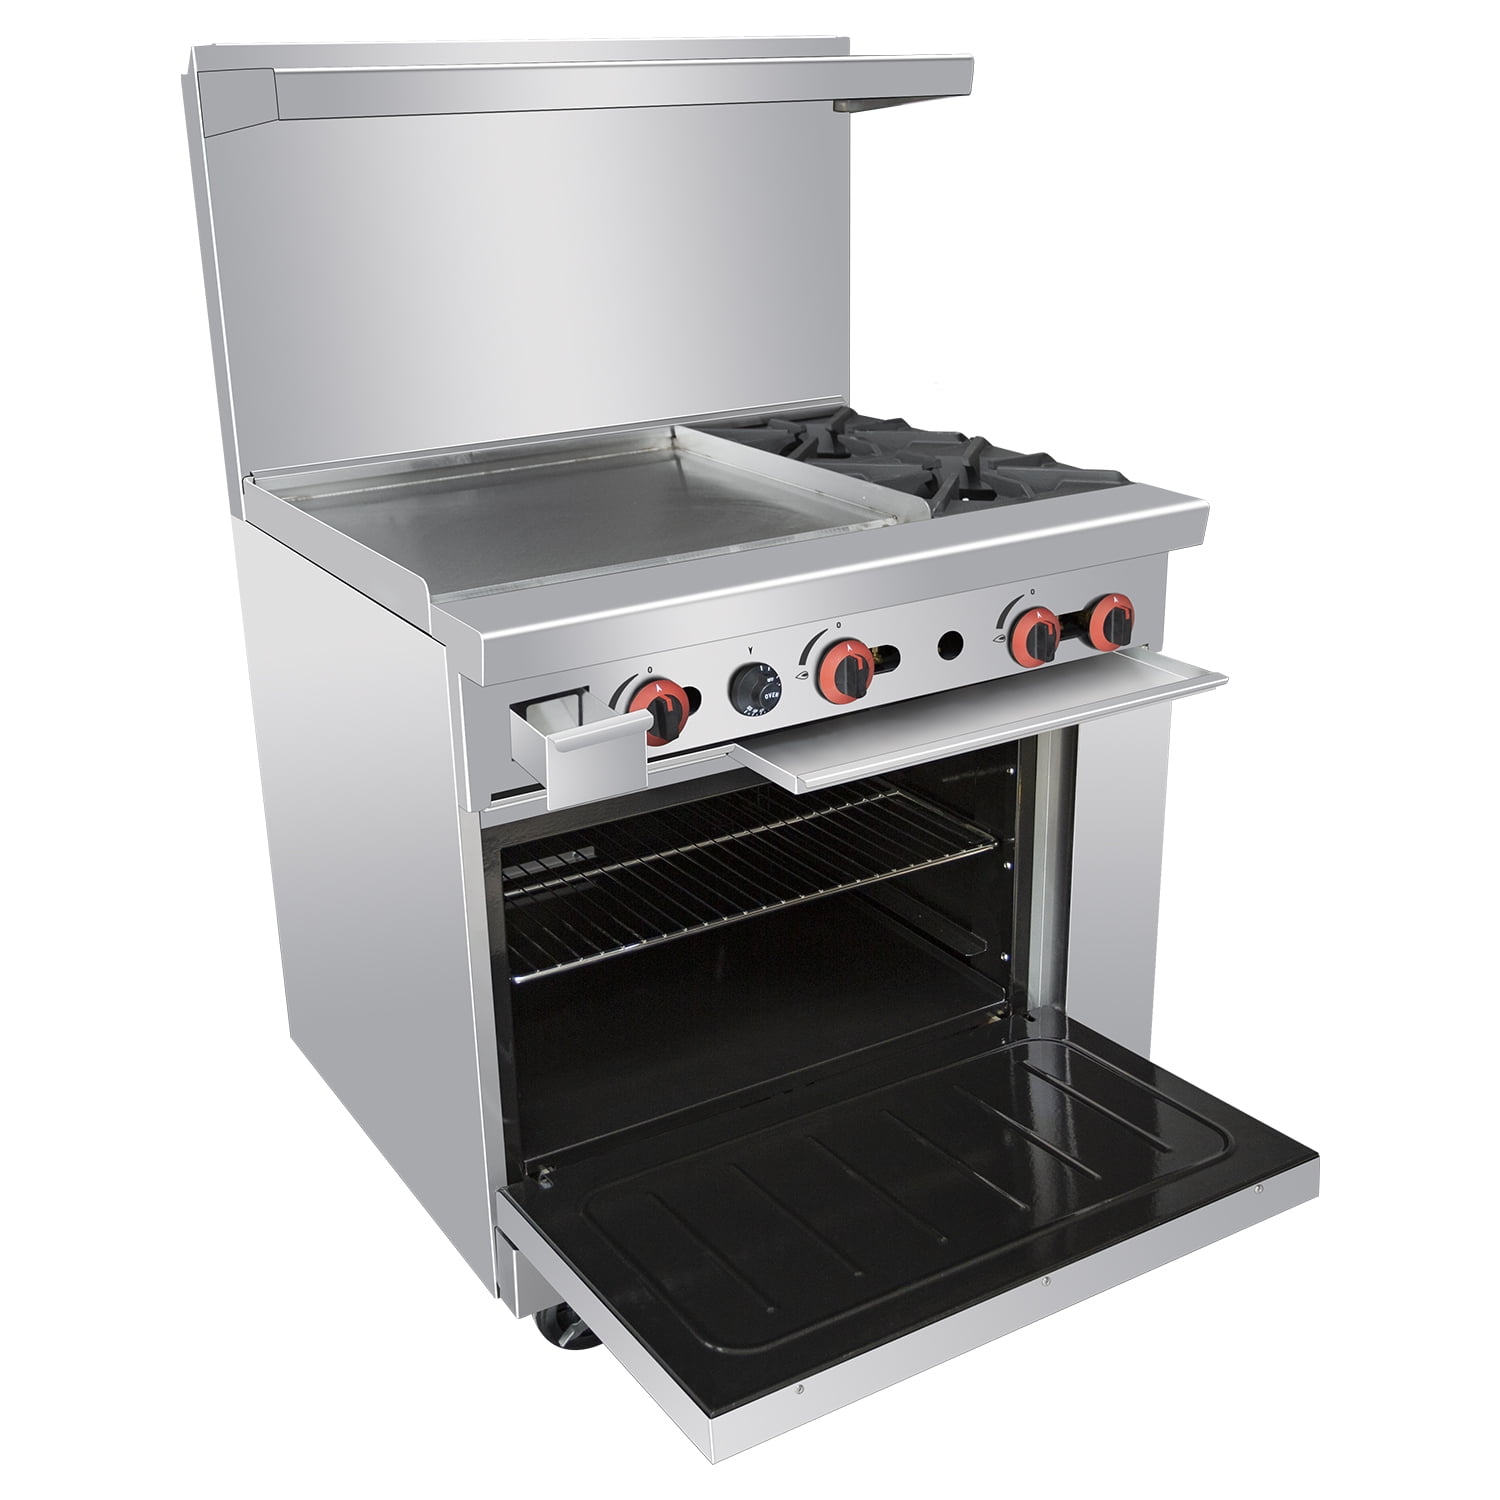 commercial-gas-range-2-burner-heavy-duty-range-with-standard-oven-and